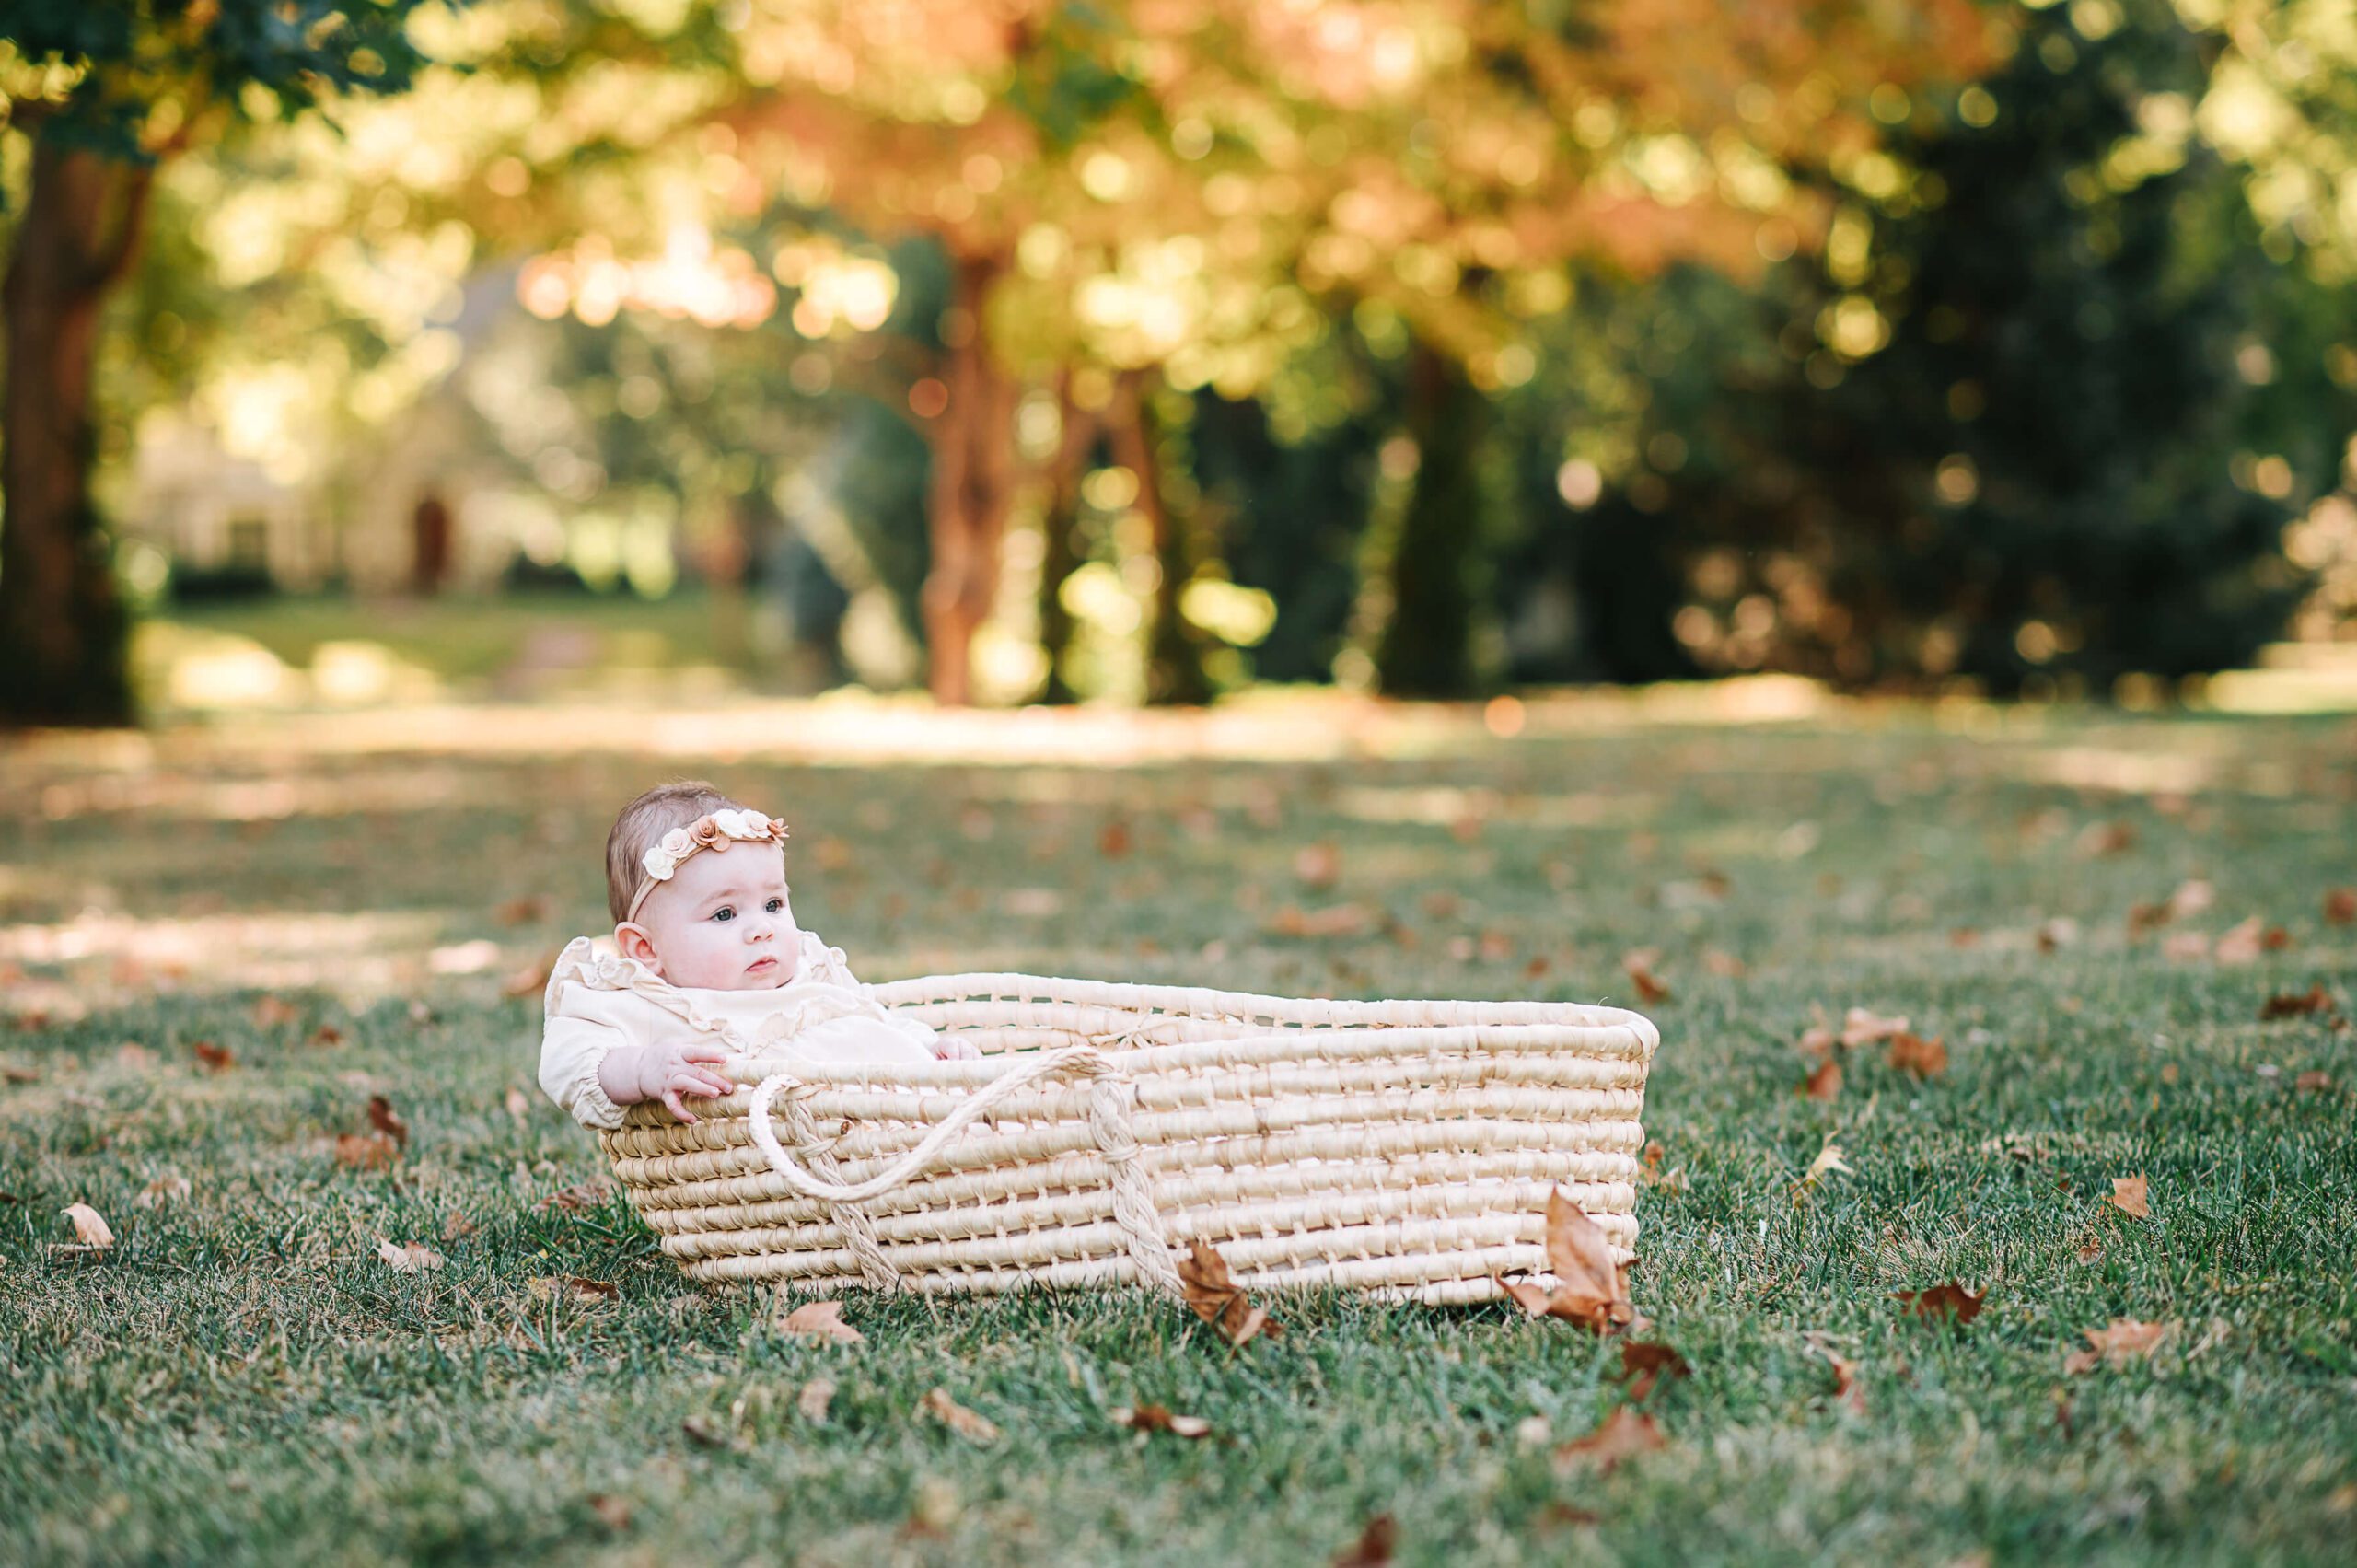 adorable baby sitting in a moses basket in a field with fall foliage